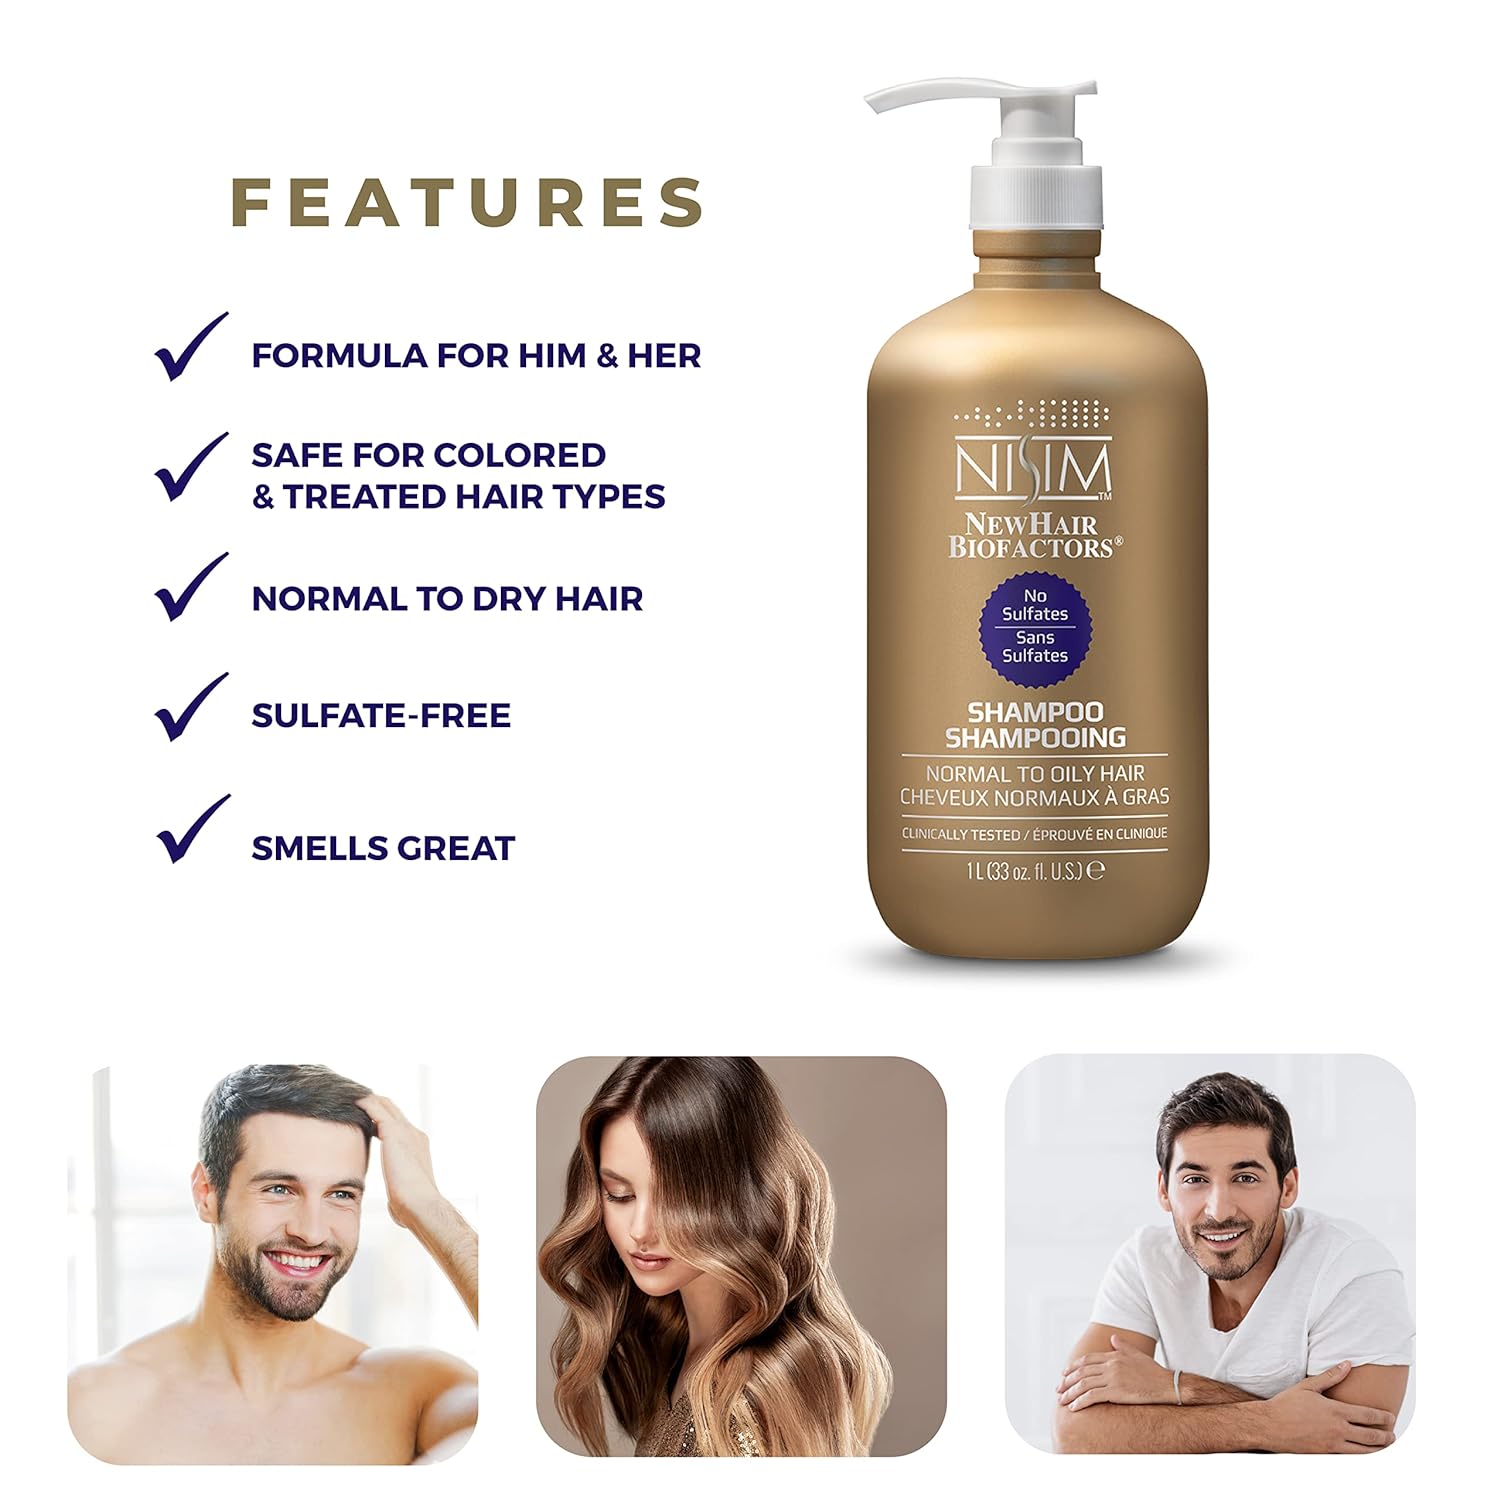 NISIM NewHair BioFactors Shampoo for Normal To Oily Hair - Deep Cleaning Shampoo That Controls Excessive Hair Loss (33 Ounce / 1000 Milliliter) : Beauty & Personal Care